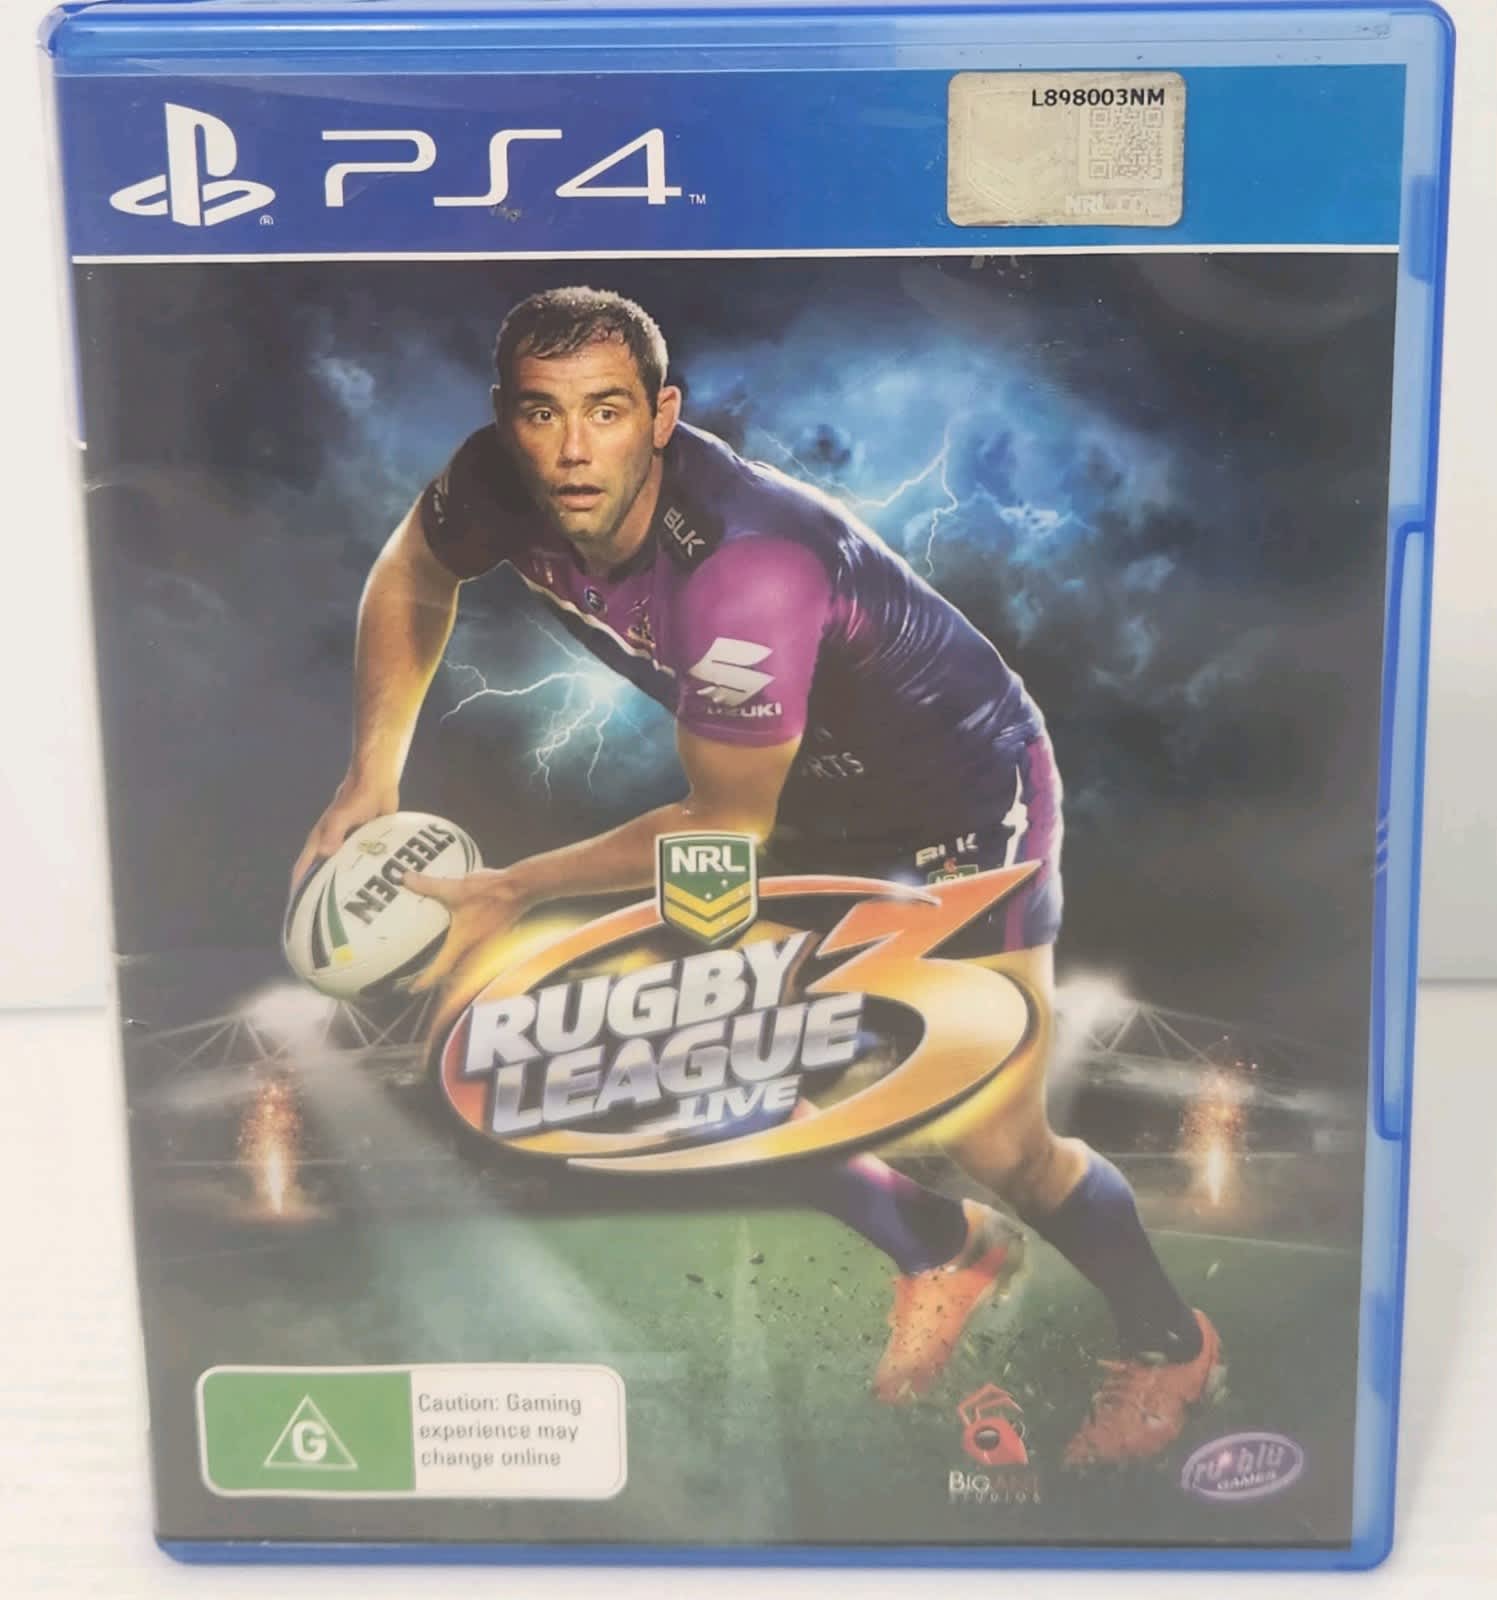 rugby league live 4 Video Games and Consoles Gumtree Australia Free Local Classifieds